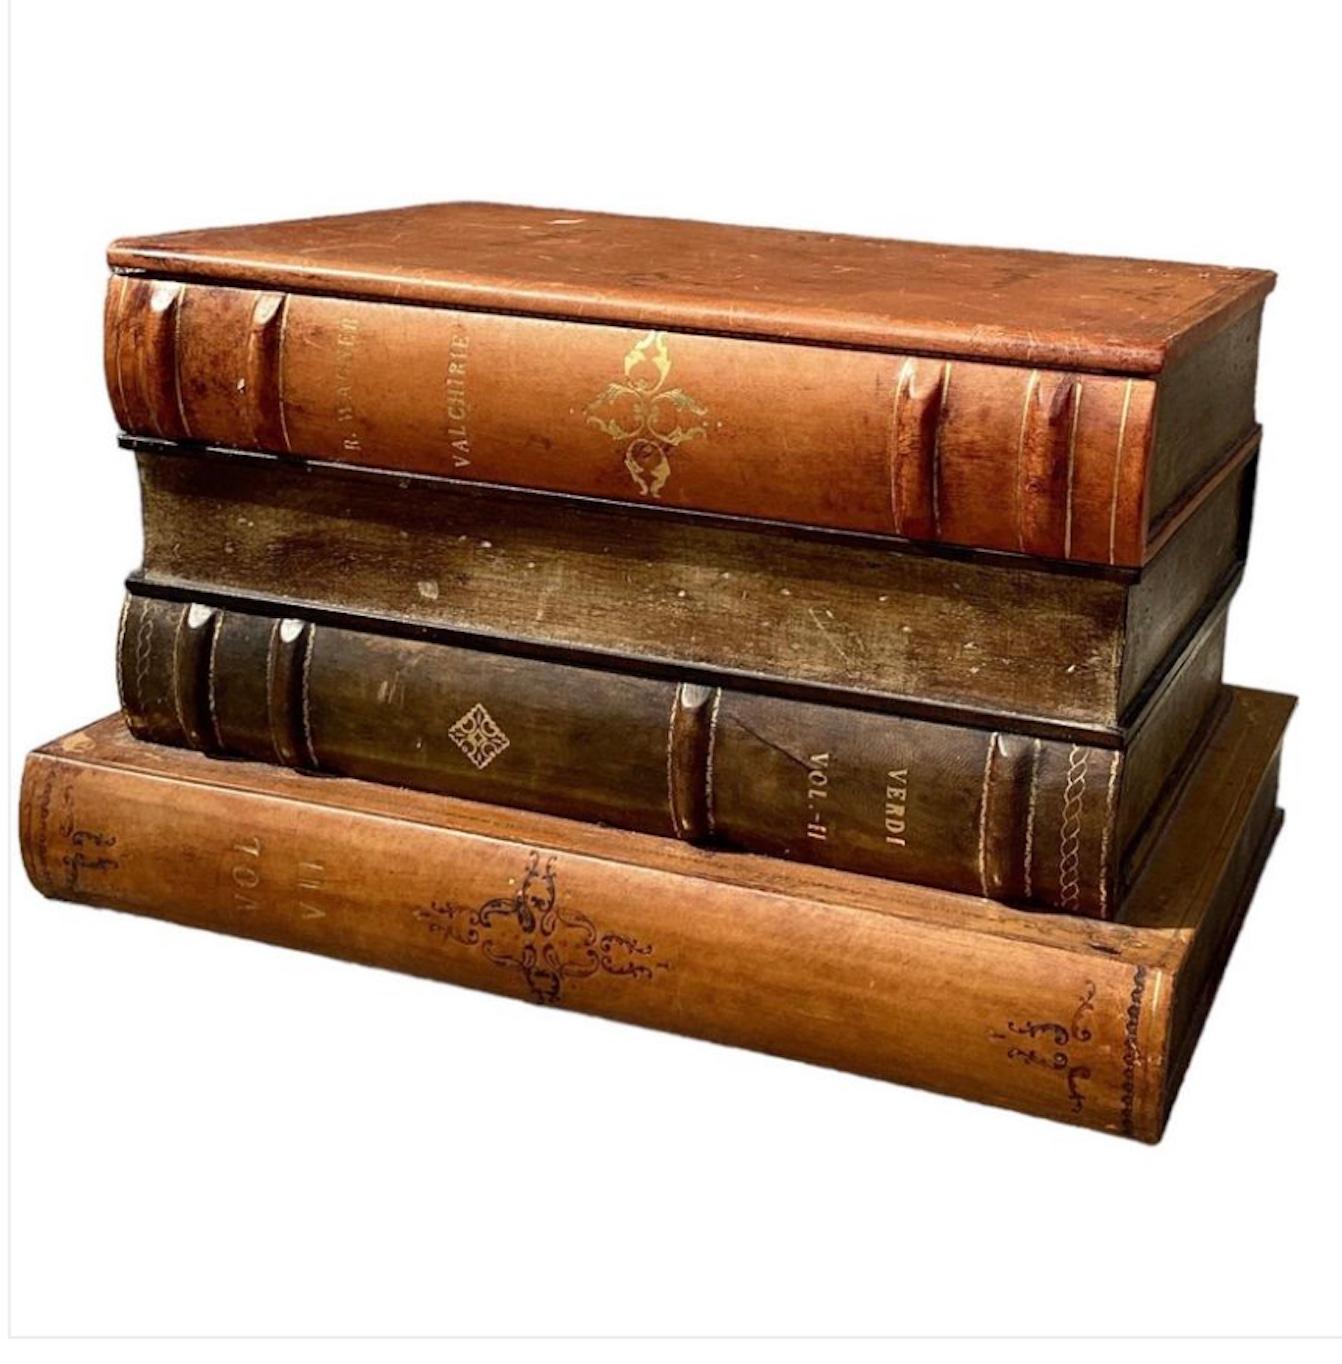 Handsome English Leather Bound Books As A Side Table With Interior Storage. For Sale 1